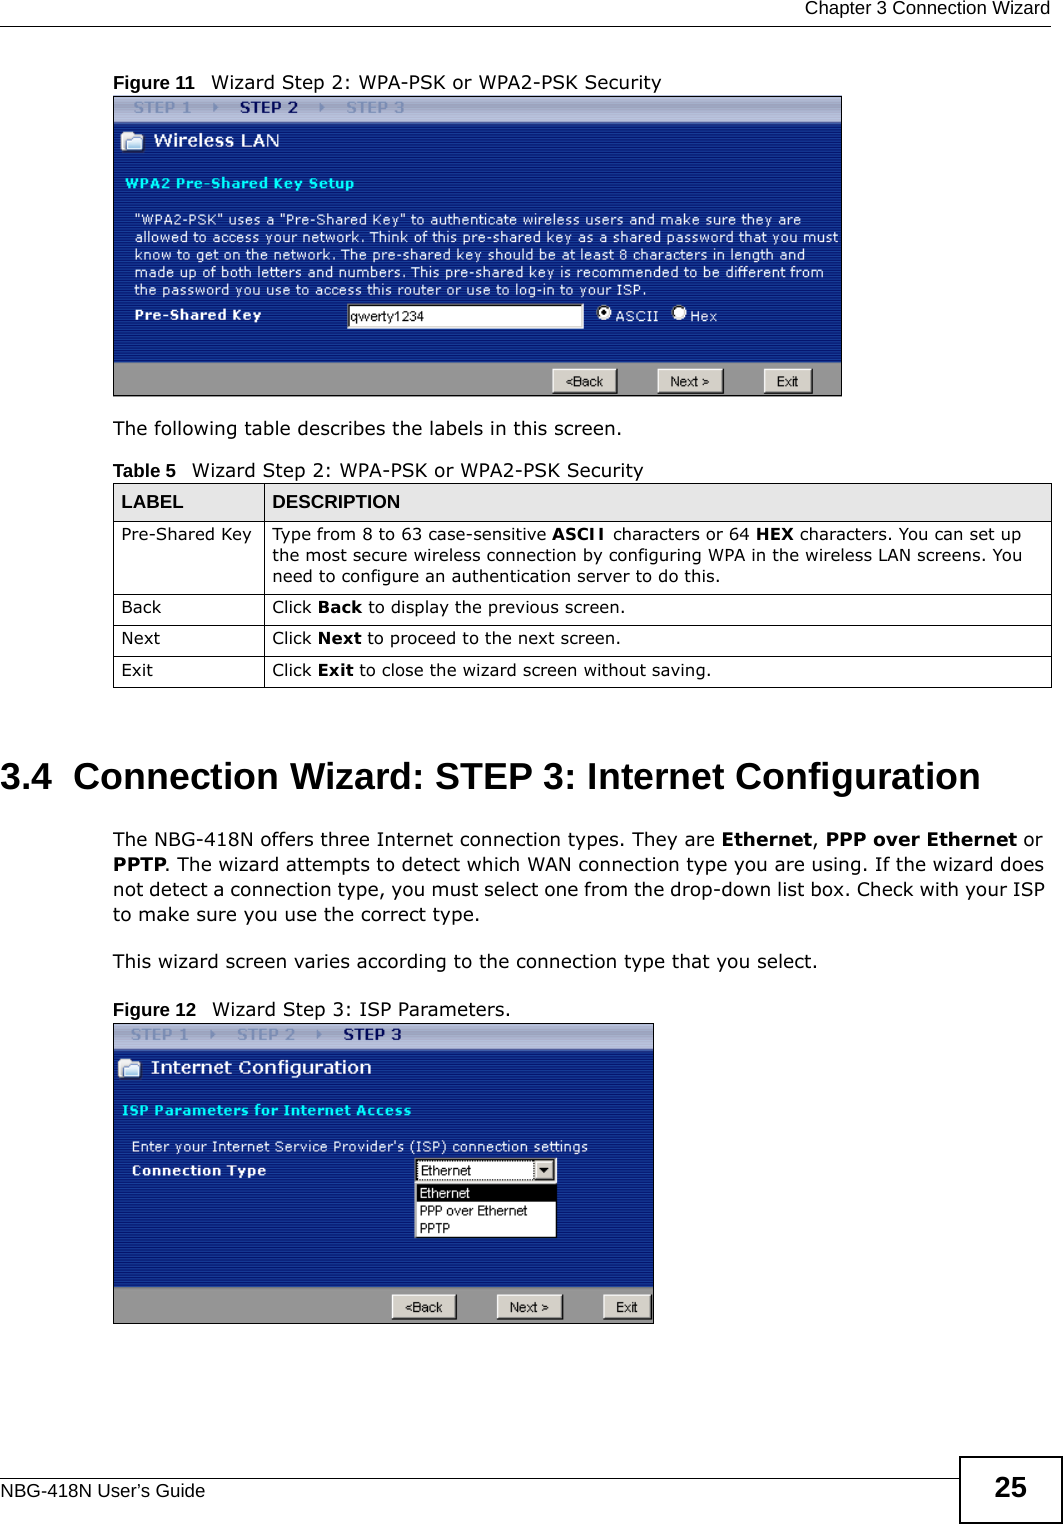  Chapter 3 Connection WizardNBG-418N User’s Guide 25Figure 11   Wizard Step 2: WPA-PSK or WPA2-PSK SecurityThe following table describes the labels in this screen. 3.4  Connection Wizard: STEP 3: Internet ConfigurationThe NBG-418N offers three Internet connection types. They are Ethernet, PPP over Ethernet or PPTP. The wizard attempts to detect which WAN connection type you are using. If the wizard does not detect a connection type, you must select one from the drop-down list box. Check with your ISP to make sure you use the correct type.This wizard screen varies according to the connection type that you select.Figure 12   Wizard Step 3: ISP Parameters.Table 5   Wizard Step 2: WPA-PSK or WPA2-PSK SecurityLABEL DESCRIPTIONPre-Shared Key Type from 8 to 63 case-sensitive ASCII characters or 64 HEX characters. You can set up the most secure wireless connection by configuring WPA in the wireless LAN screens. You need to configure an authentication server to do this.Back Click Back to display the previous screen.Next Click Next to proceed to the next screen. Exit Click Exit to close the wizard screen without saving.